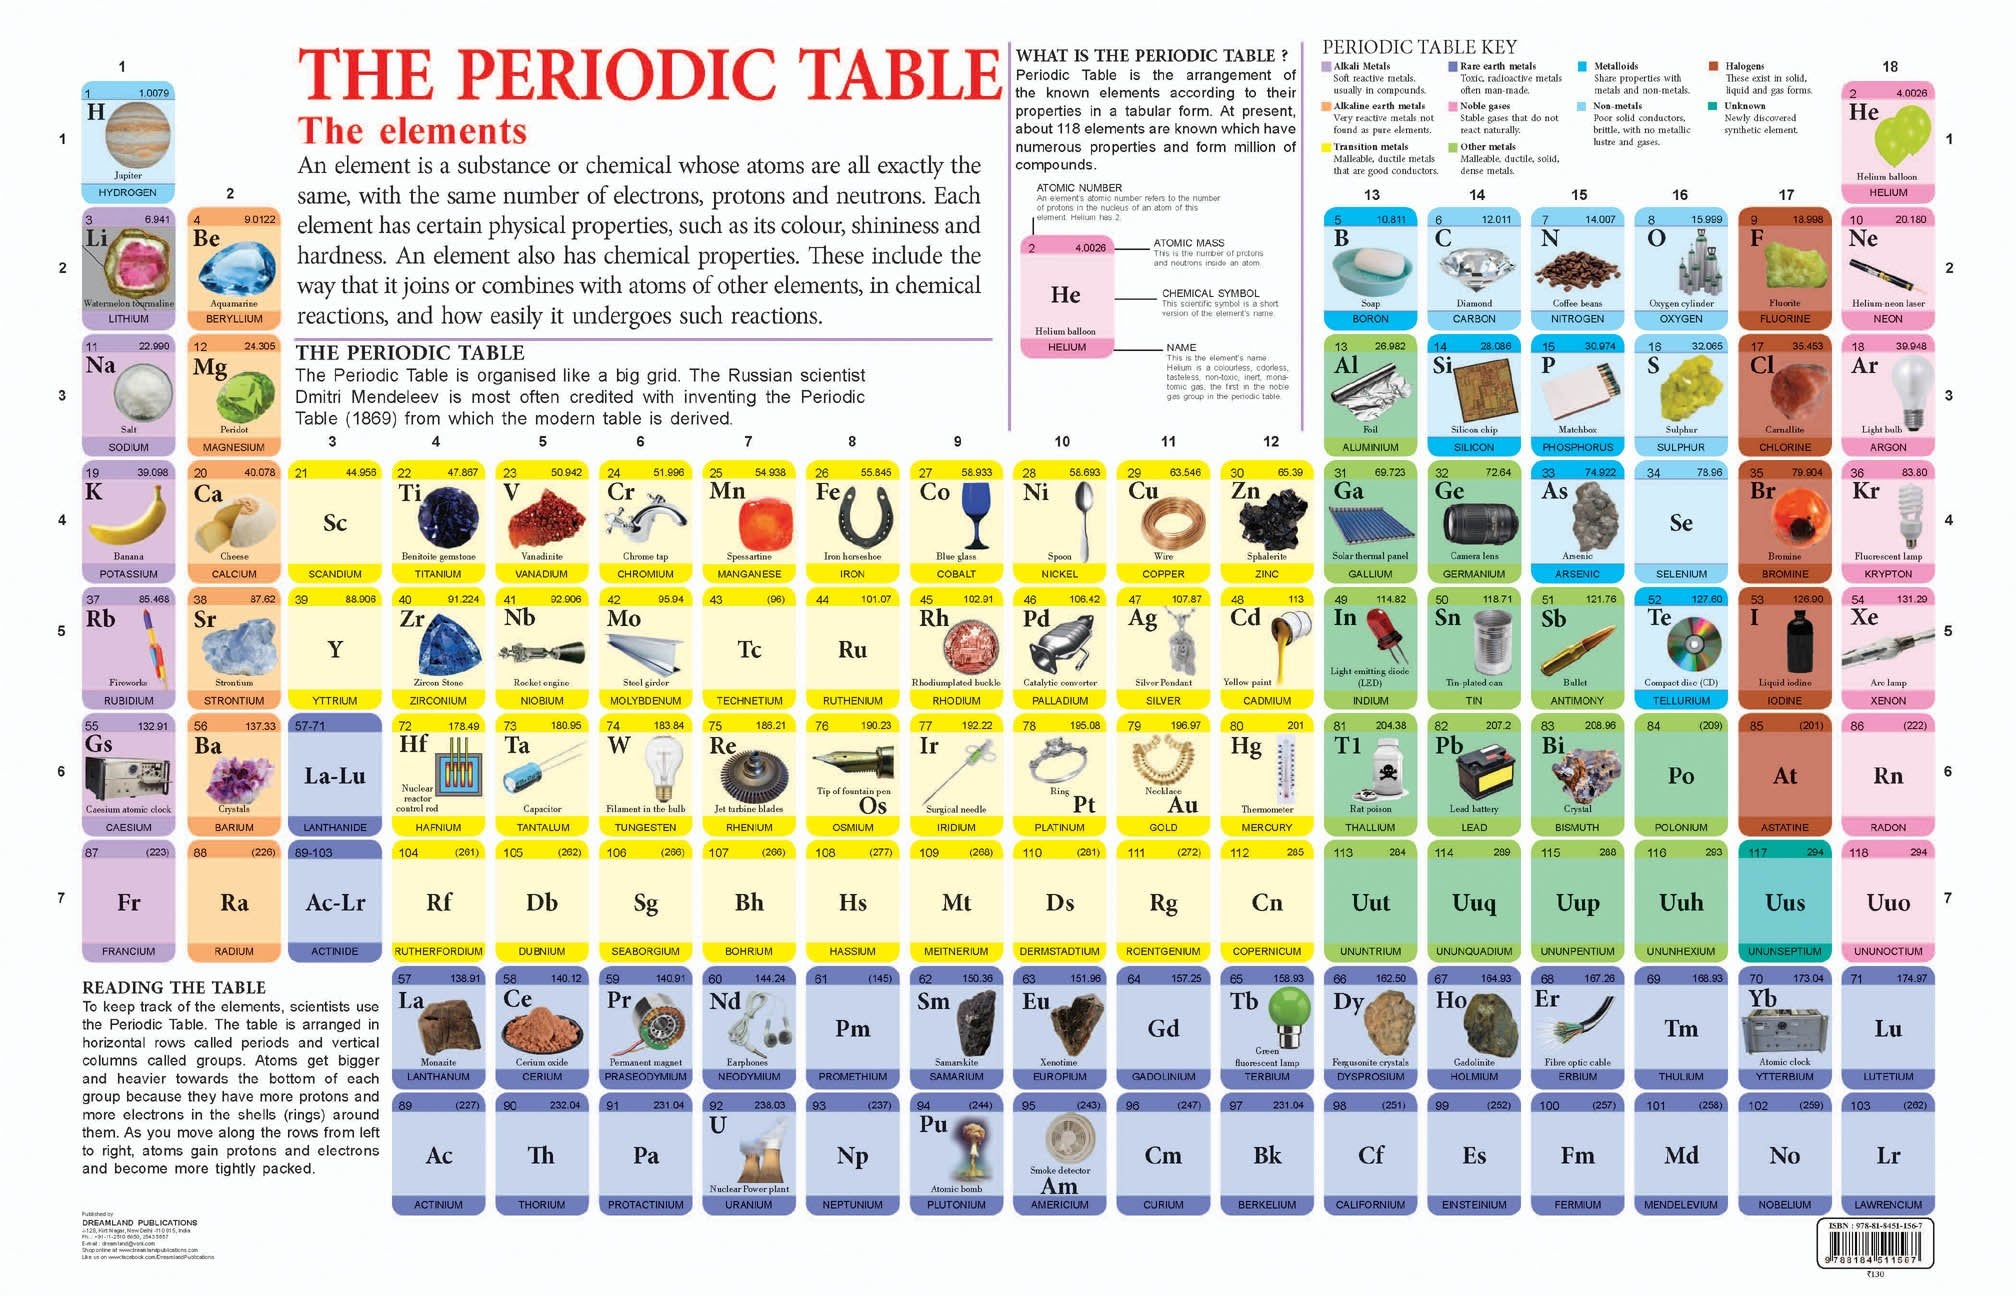 Periodic Table Educational Wall Chart For Kids - Both Side Hard Laminated (Size 48 x 73 cm) Poster